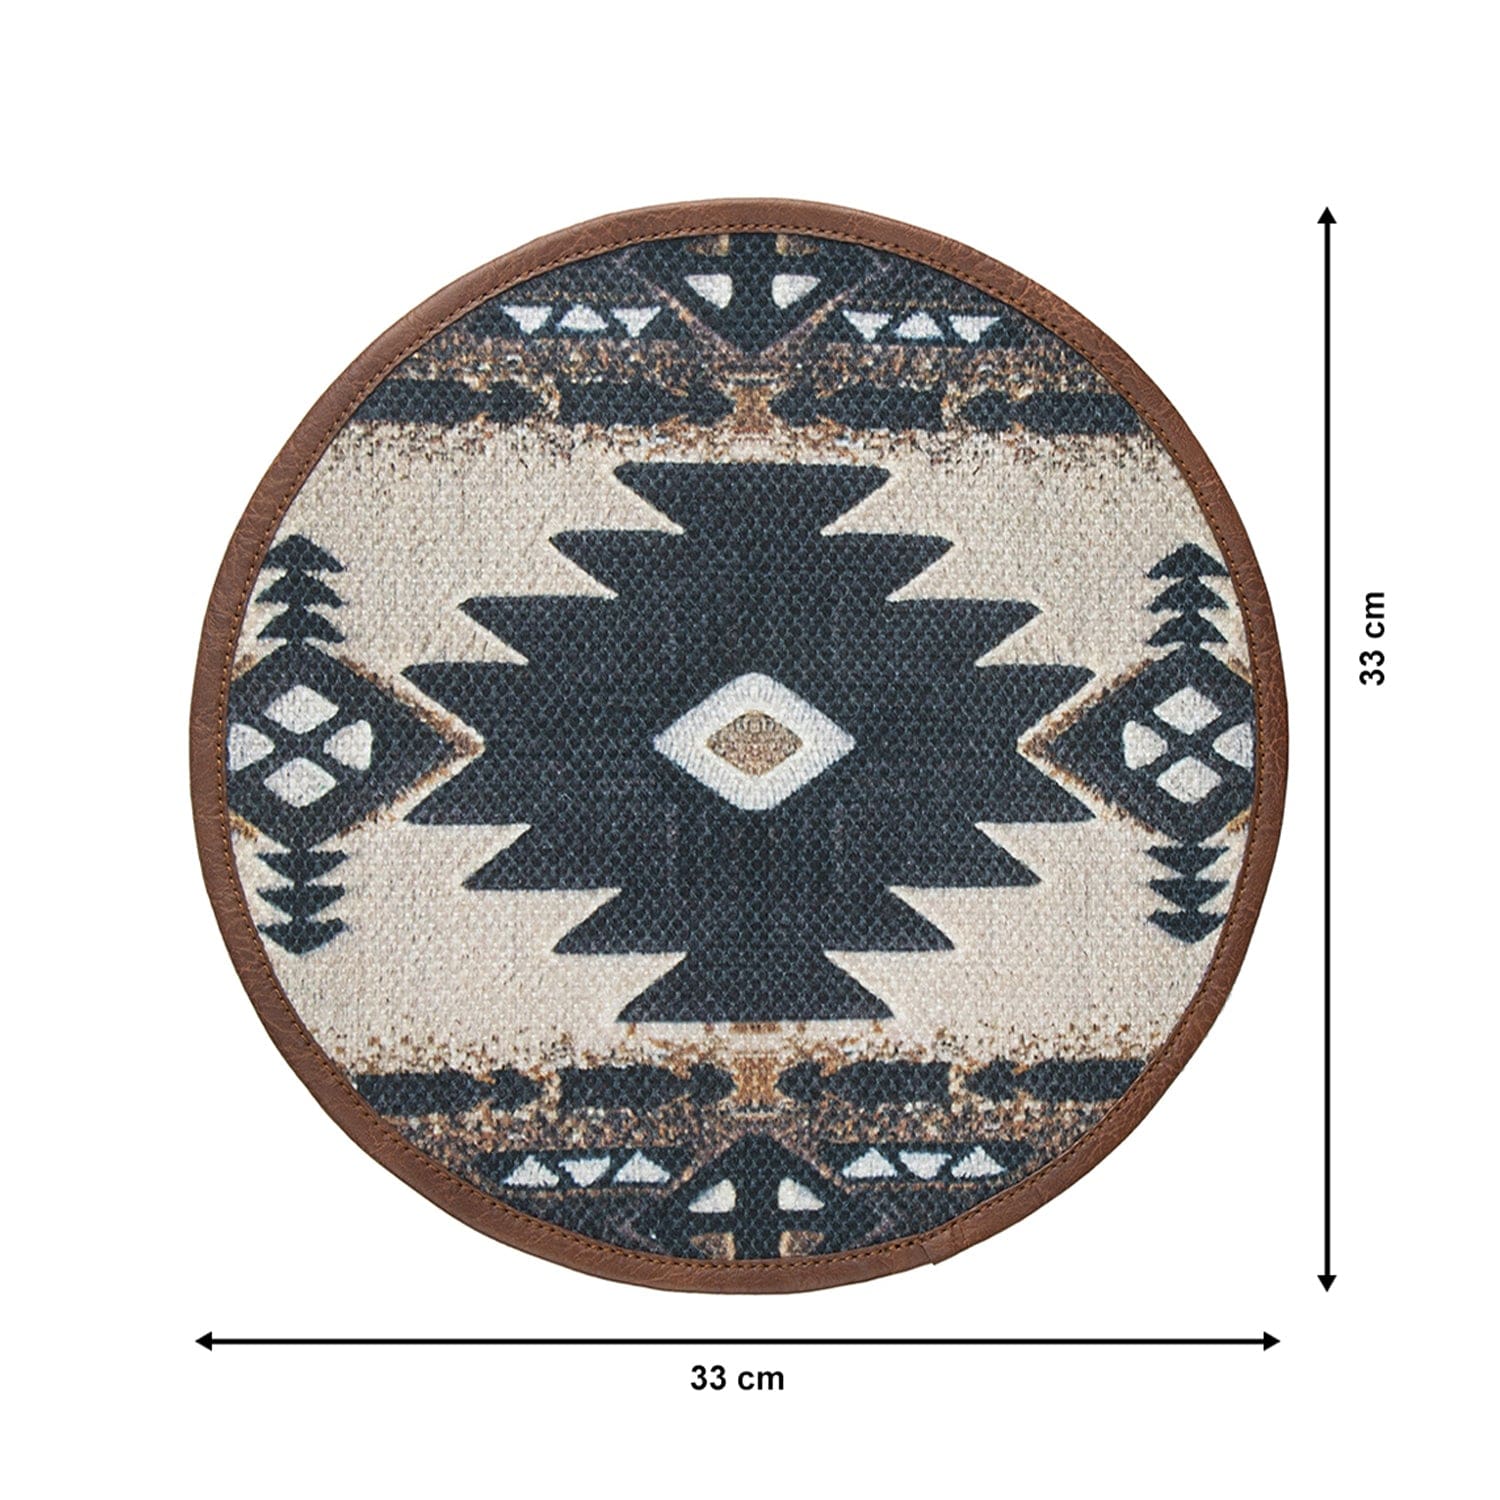 Mona B Set of 2 Printed Mosaic Placemats, 13 INCH Round, Best for Bed-Side Table/Center Table, Dining Table/Shelves (Geo) - Placemat by Mona-B - Backpack, Flat30, New Arrivals, Sale, Shop1999, Shop2999, Shop3999